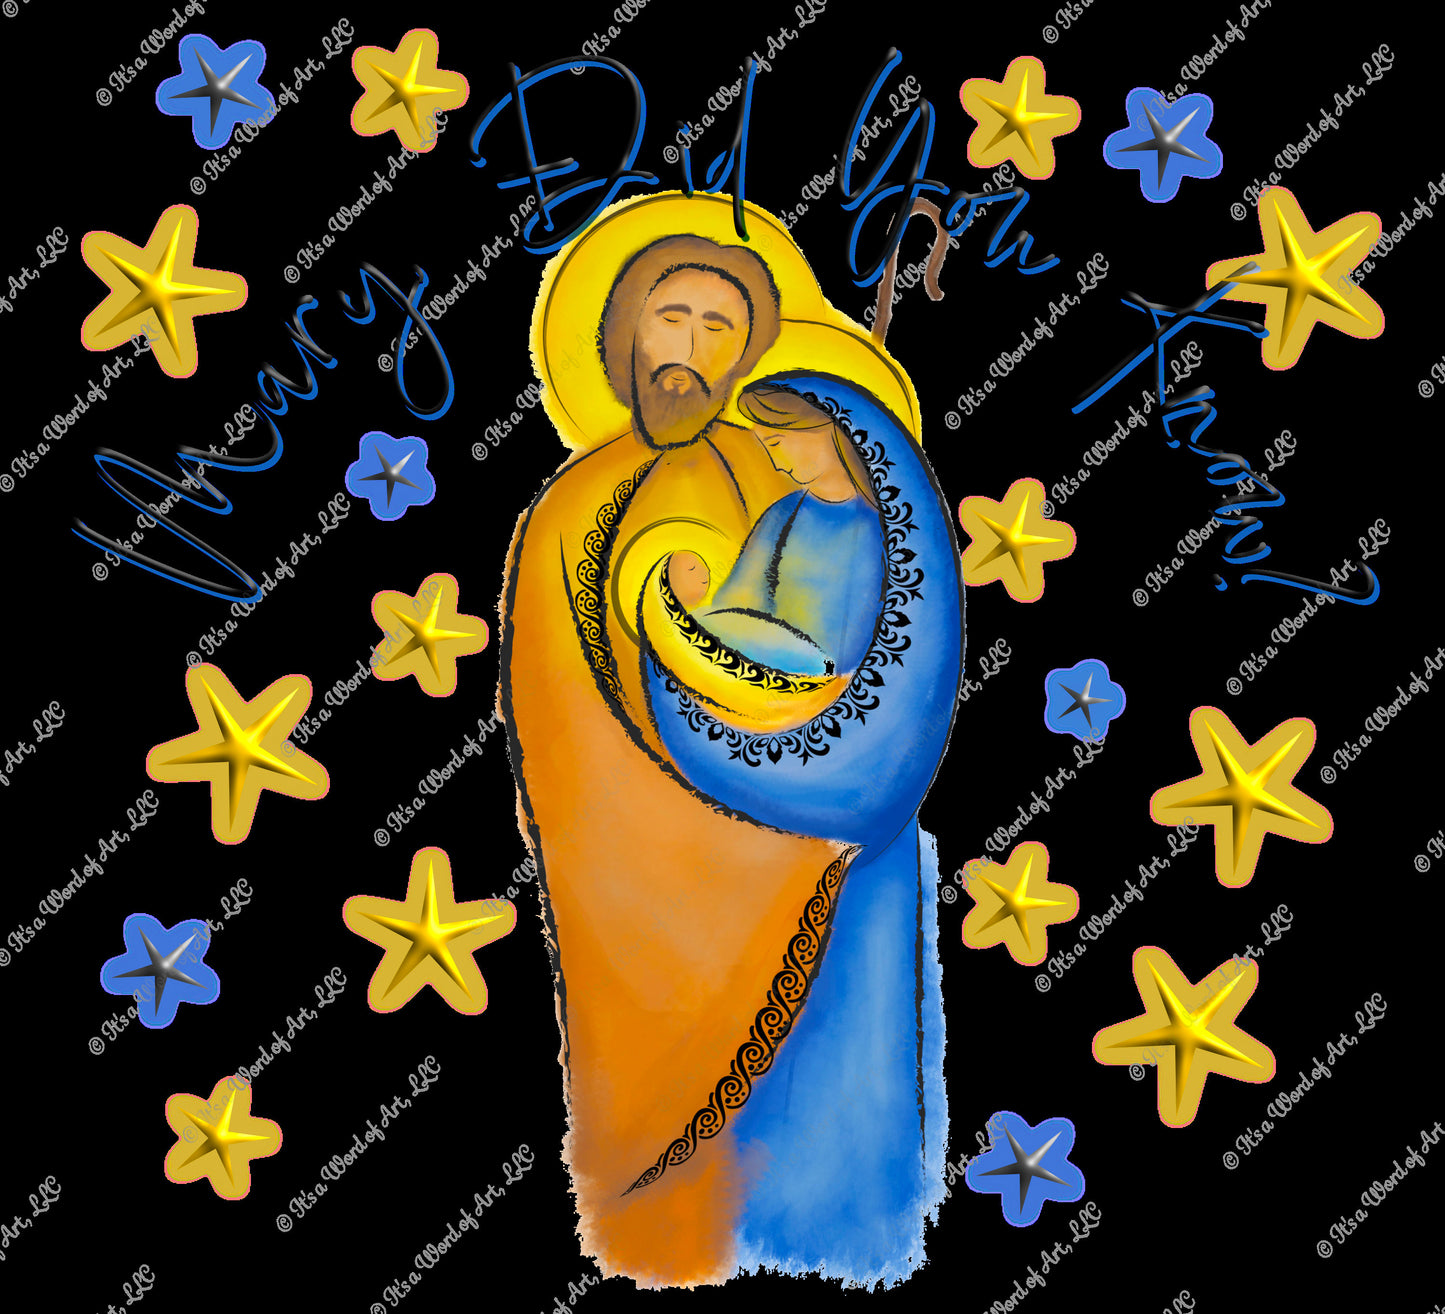 Christmas 322 - Mary did you know? Mary Joseph Baby Jesus  - Sublimation Transfer Set/Ready To Press Sublimation Transfer